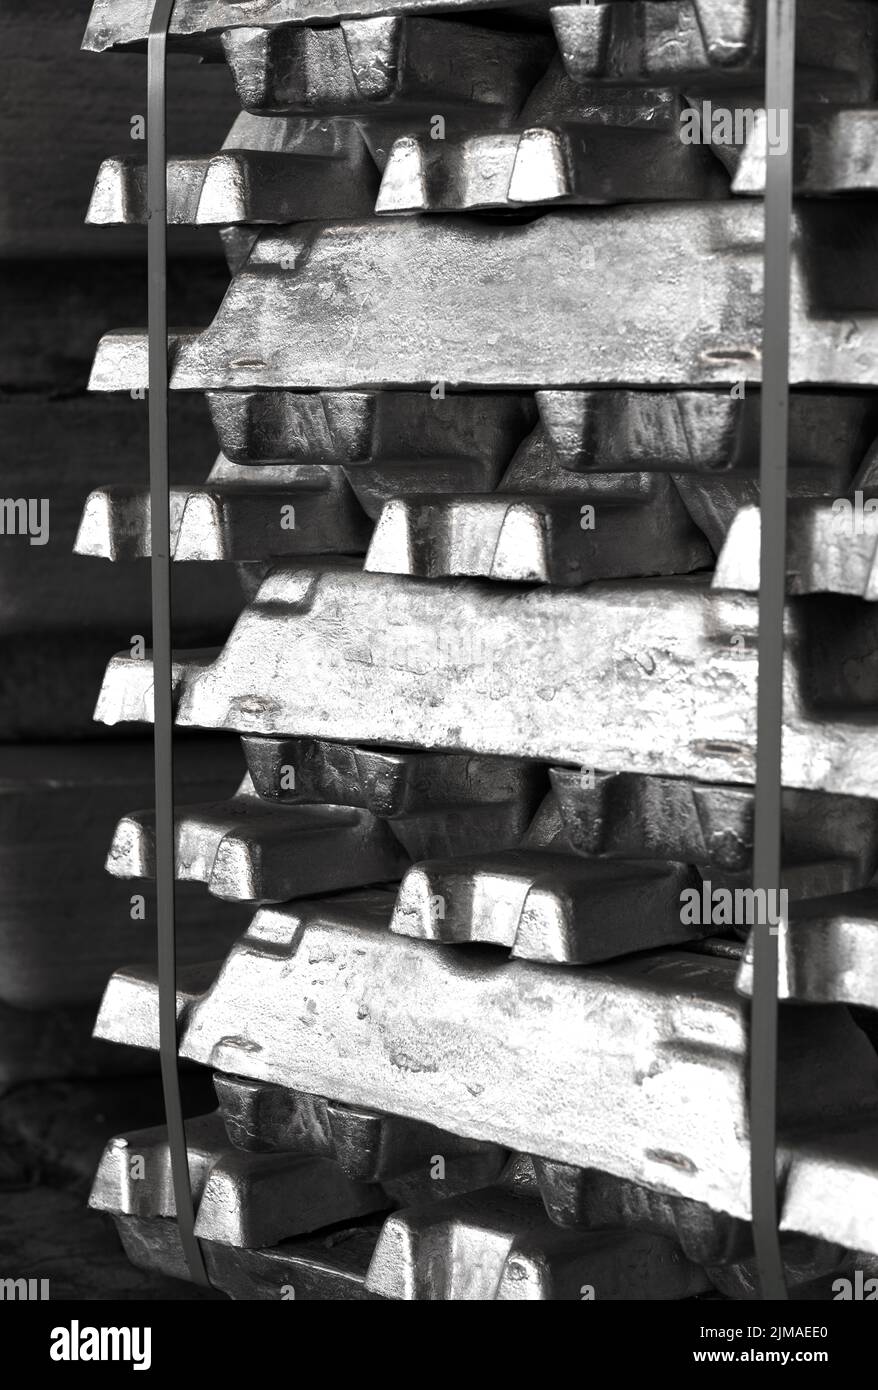 aluminum ingots stacked in the warehouse waiting for meltting, Industrial photo in black and white Stock Photo